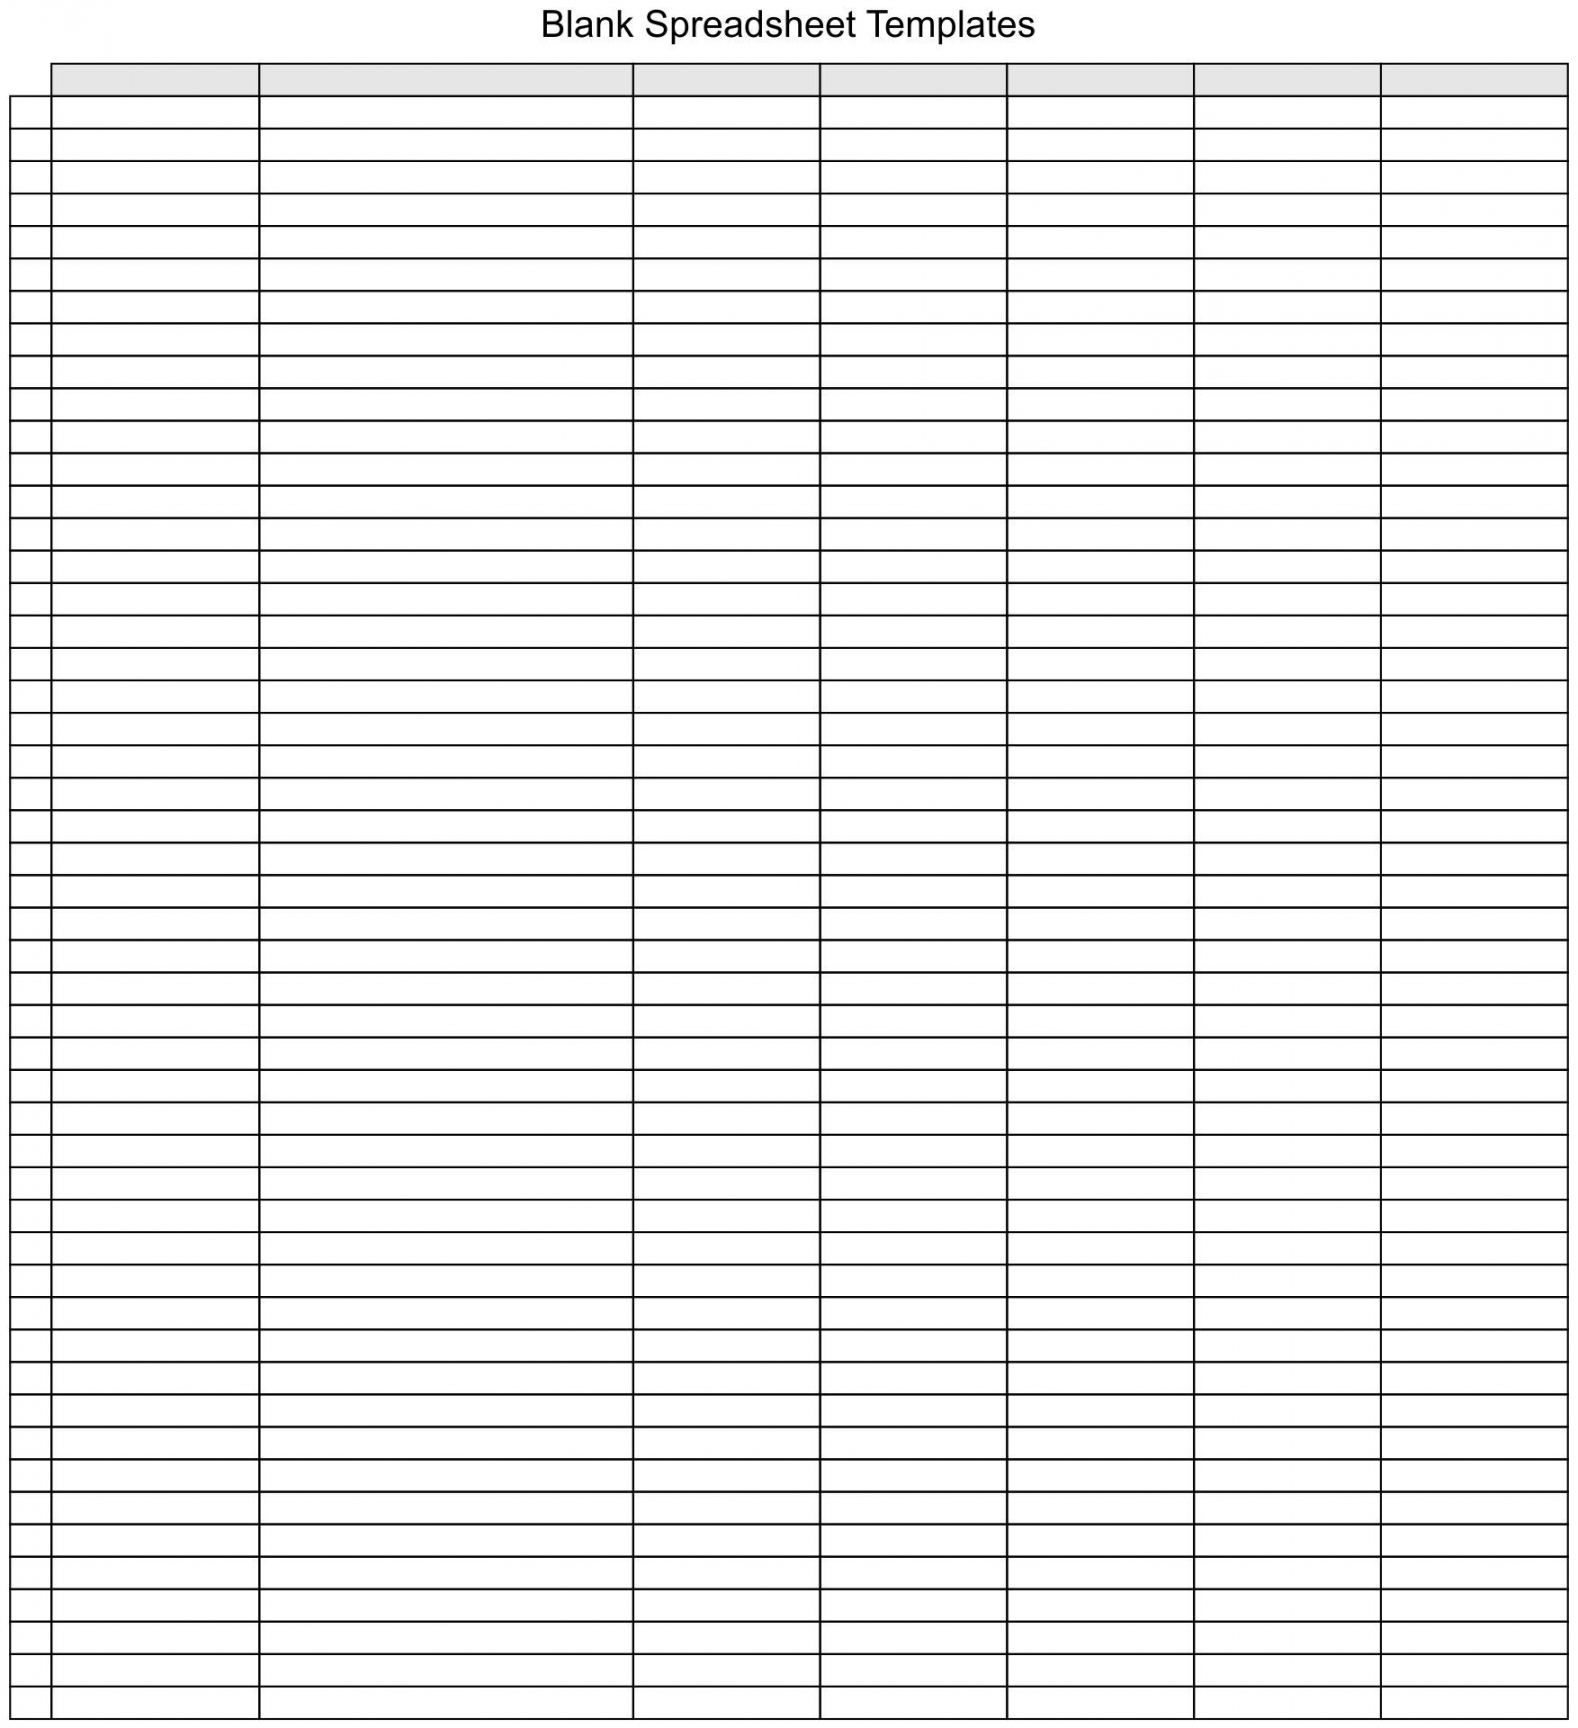 Best Free Printable Spreadsheets Templates - printablee - Blank Printable Spreadsheet